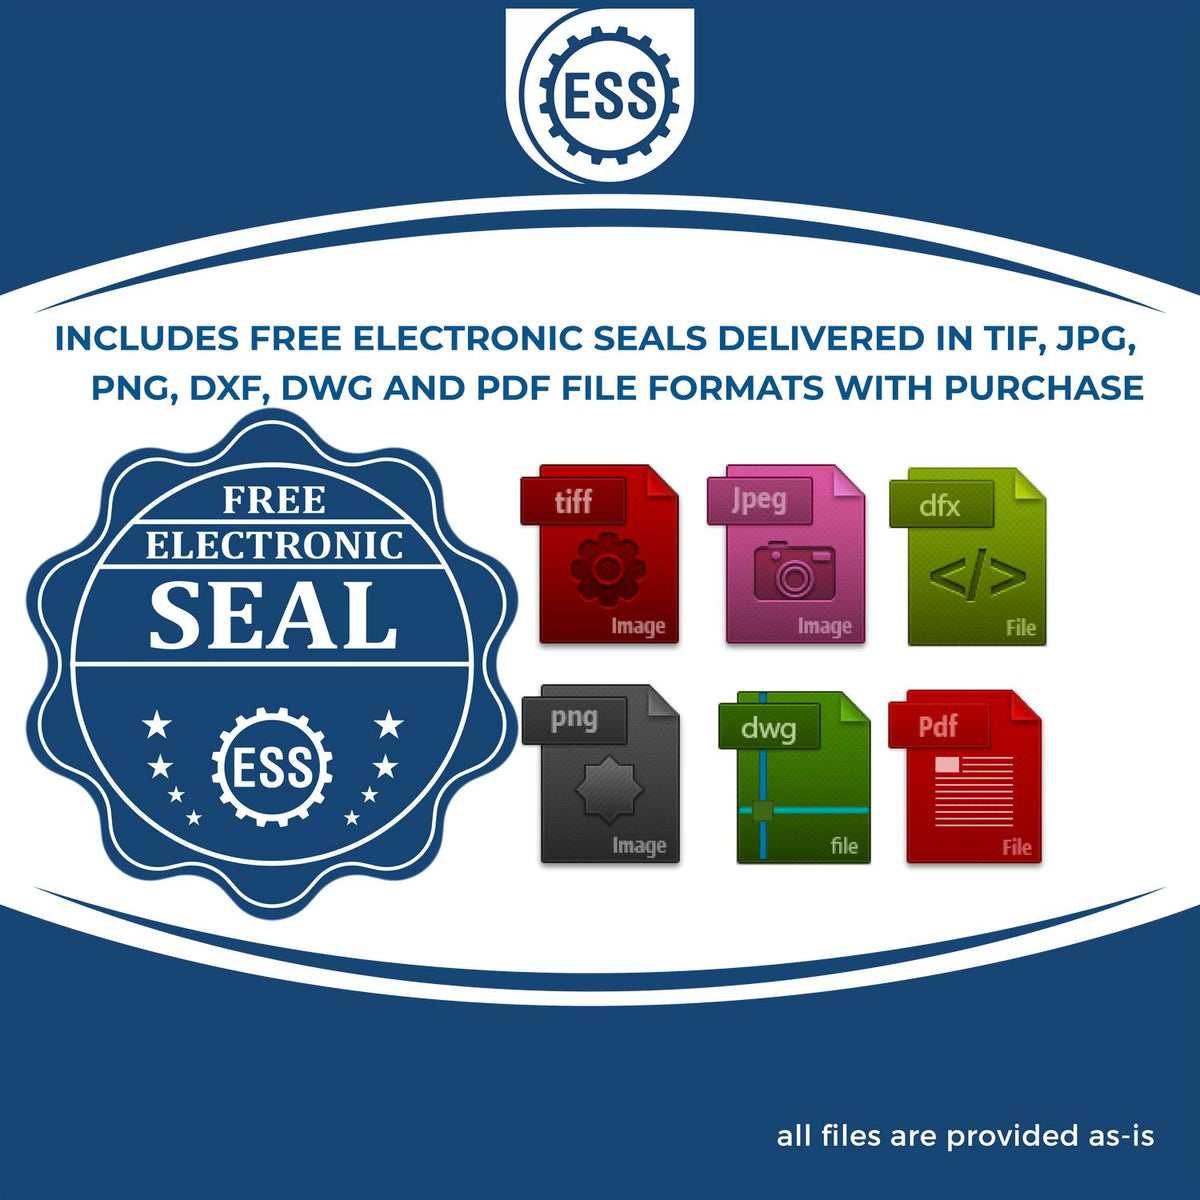 An infographic for the free electronic seal for the Hybrid New Hampshire Engineer Seal illustrating the different file type icons such as DXF, DWG, TIF, JPG and PNG.